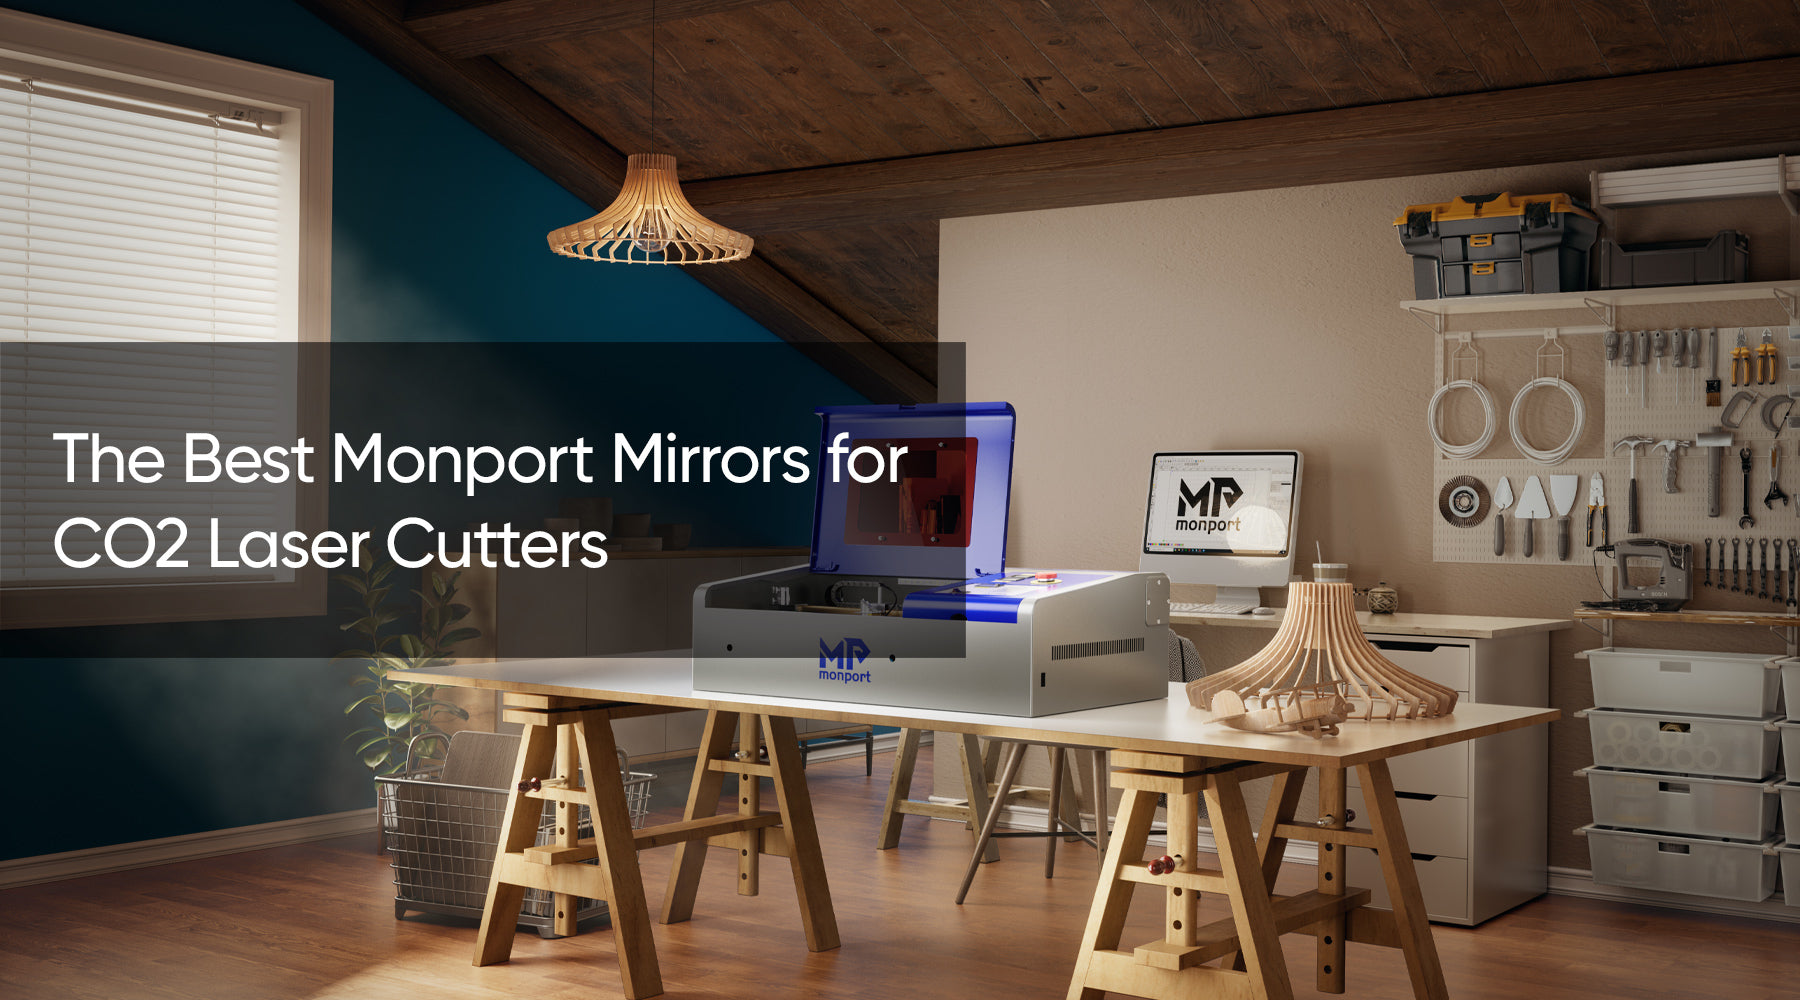 The Best Monport Mirrors for CO2 Laser Cutters